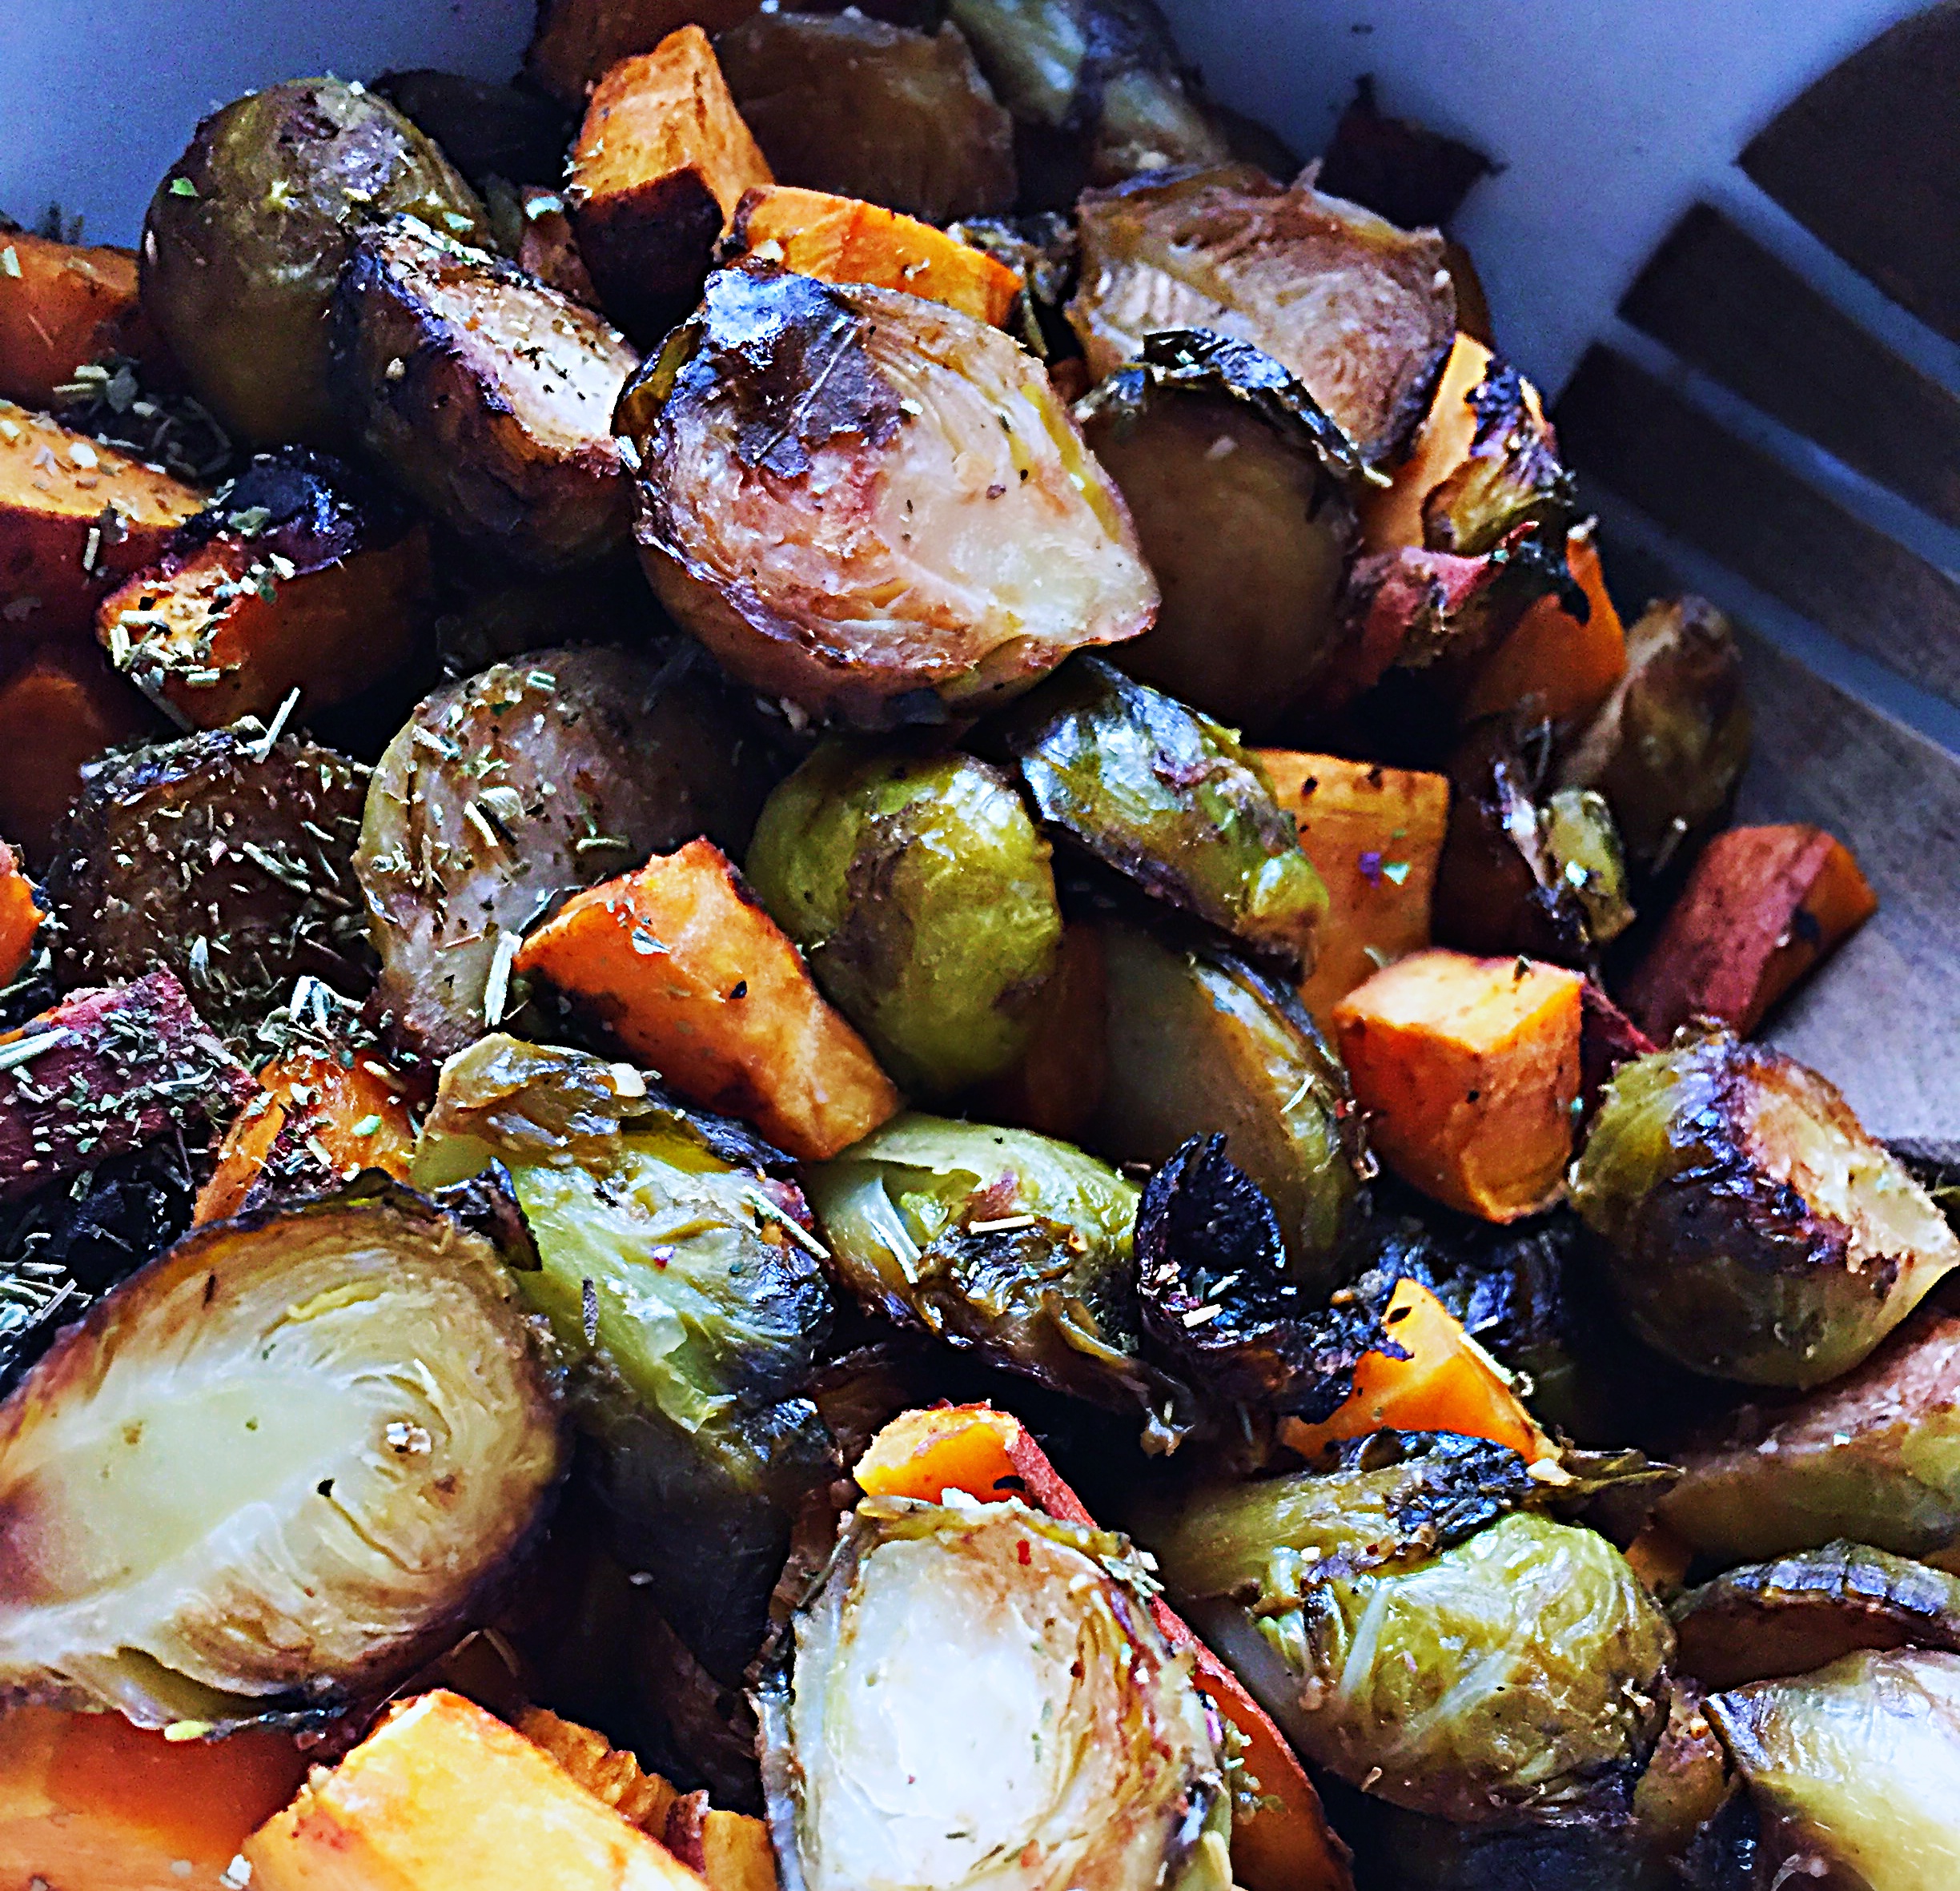 Oven Roasted Brussels Sprouts and Sweet Potatoes with Balsamic Glaze